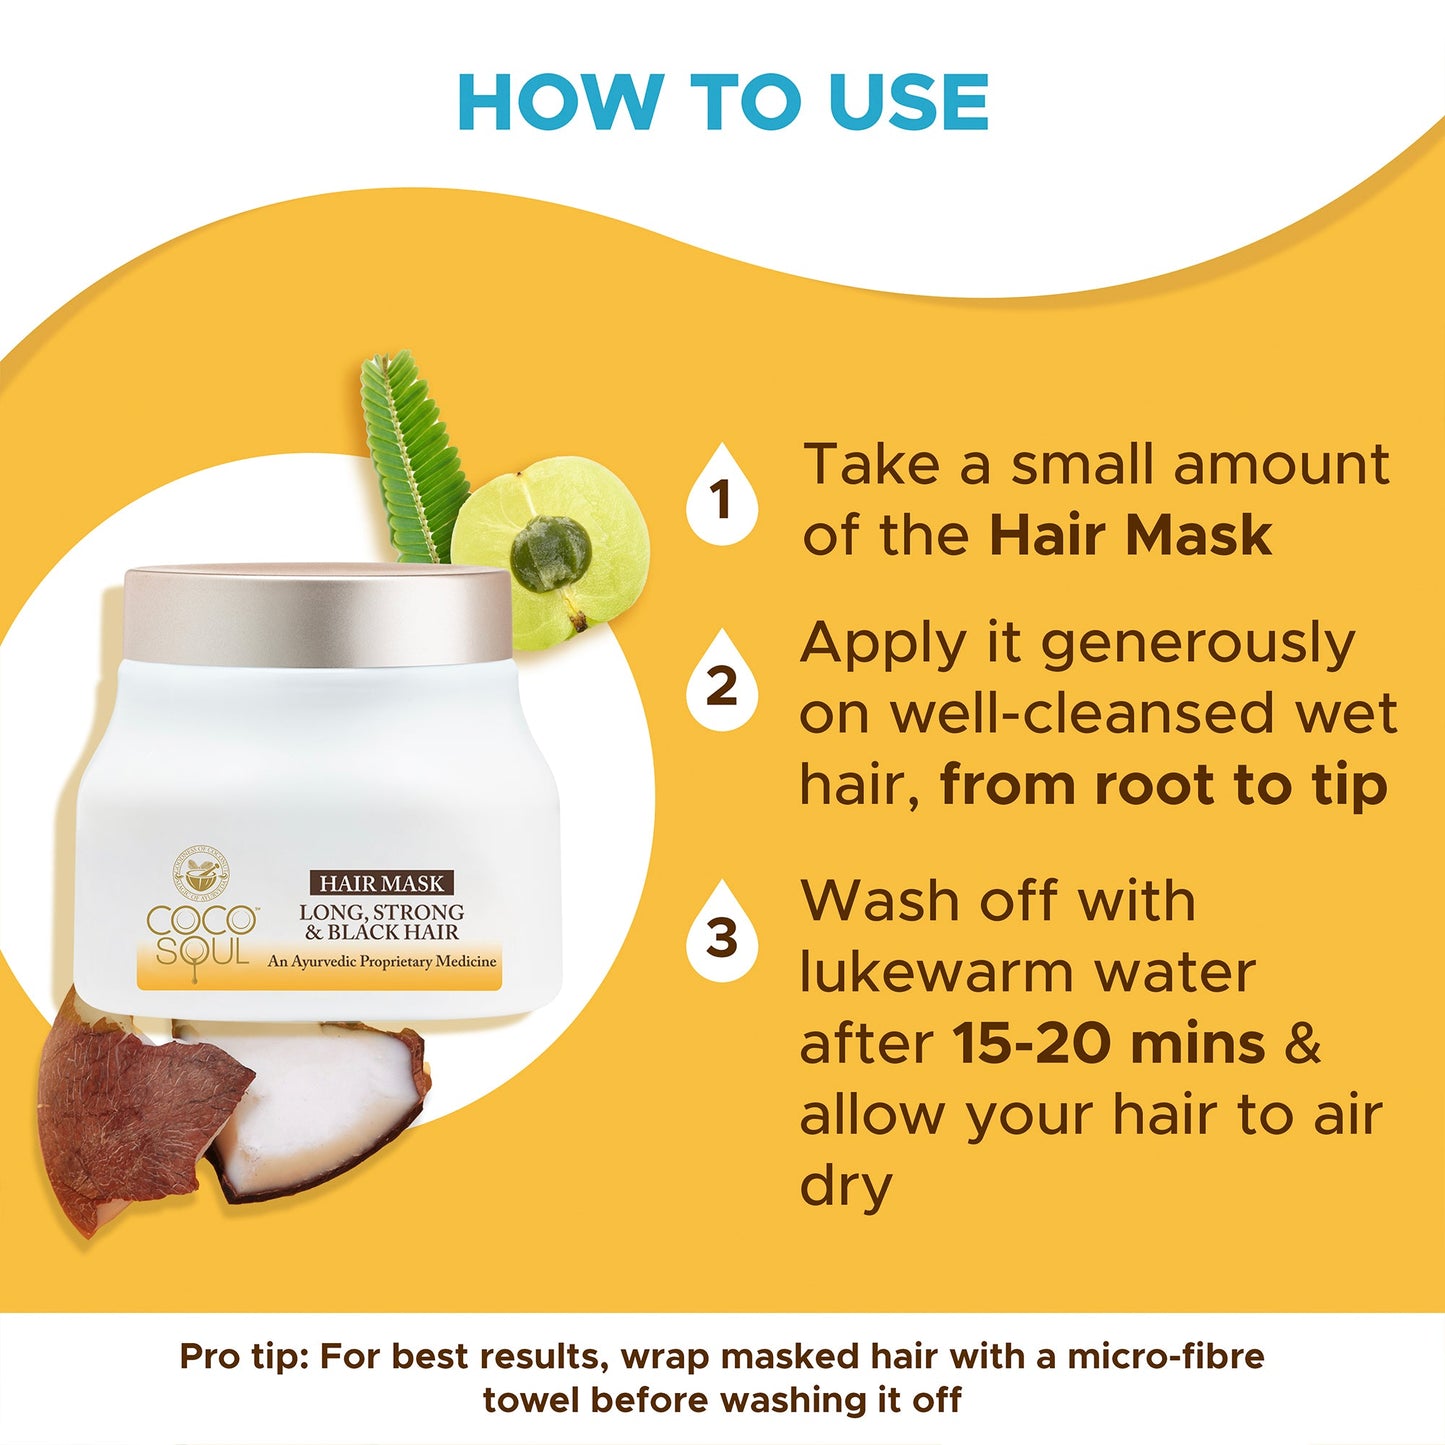 Ayurvedic Hair Mask for Long, Strong and Black Hair with Coconut, Amla, and Sesame